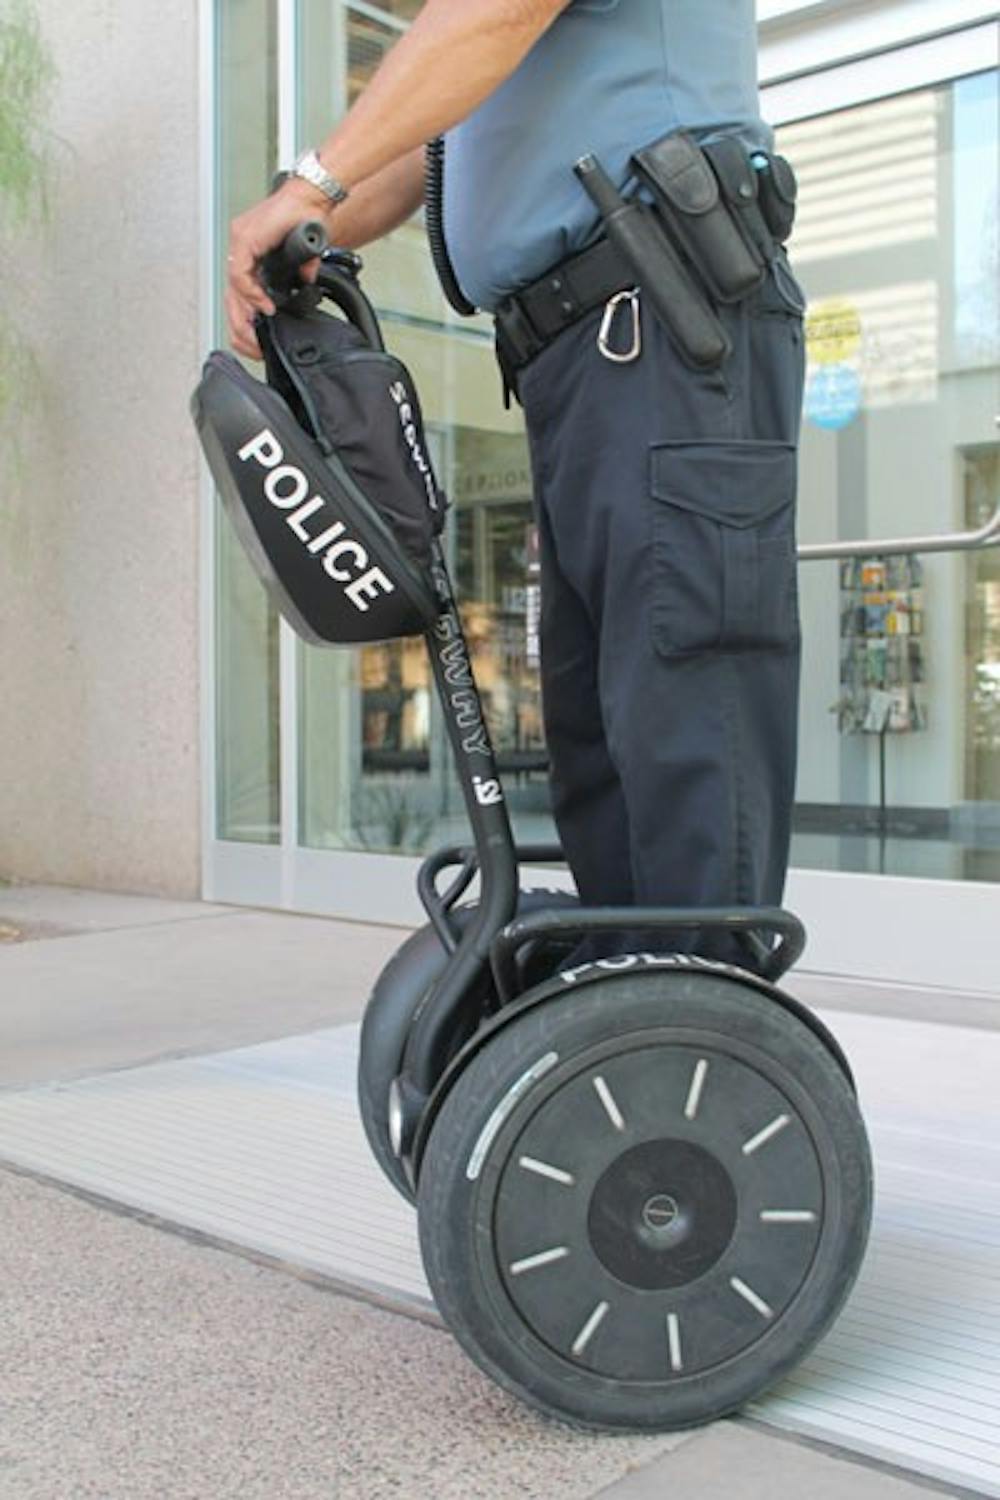 Police Aid Richard Bailey with the ASU Police Department rides around on his eco-friendly Segway to patrol the Tempe campus. (Photo by Robin Kiyutelluk)